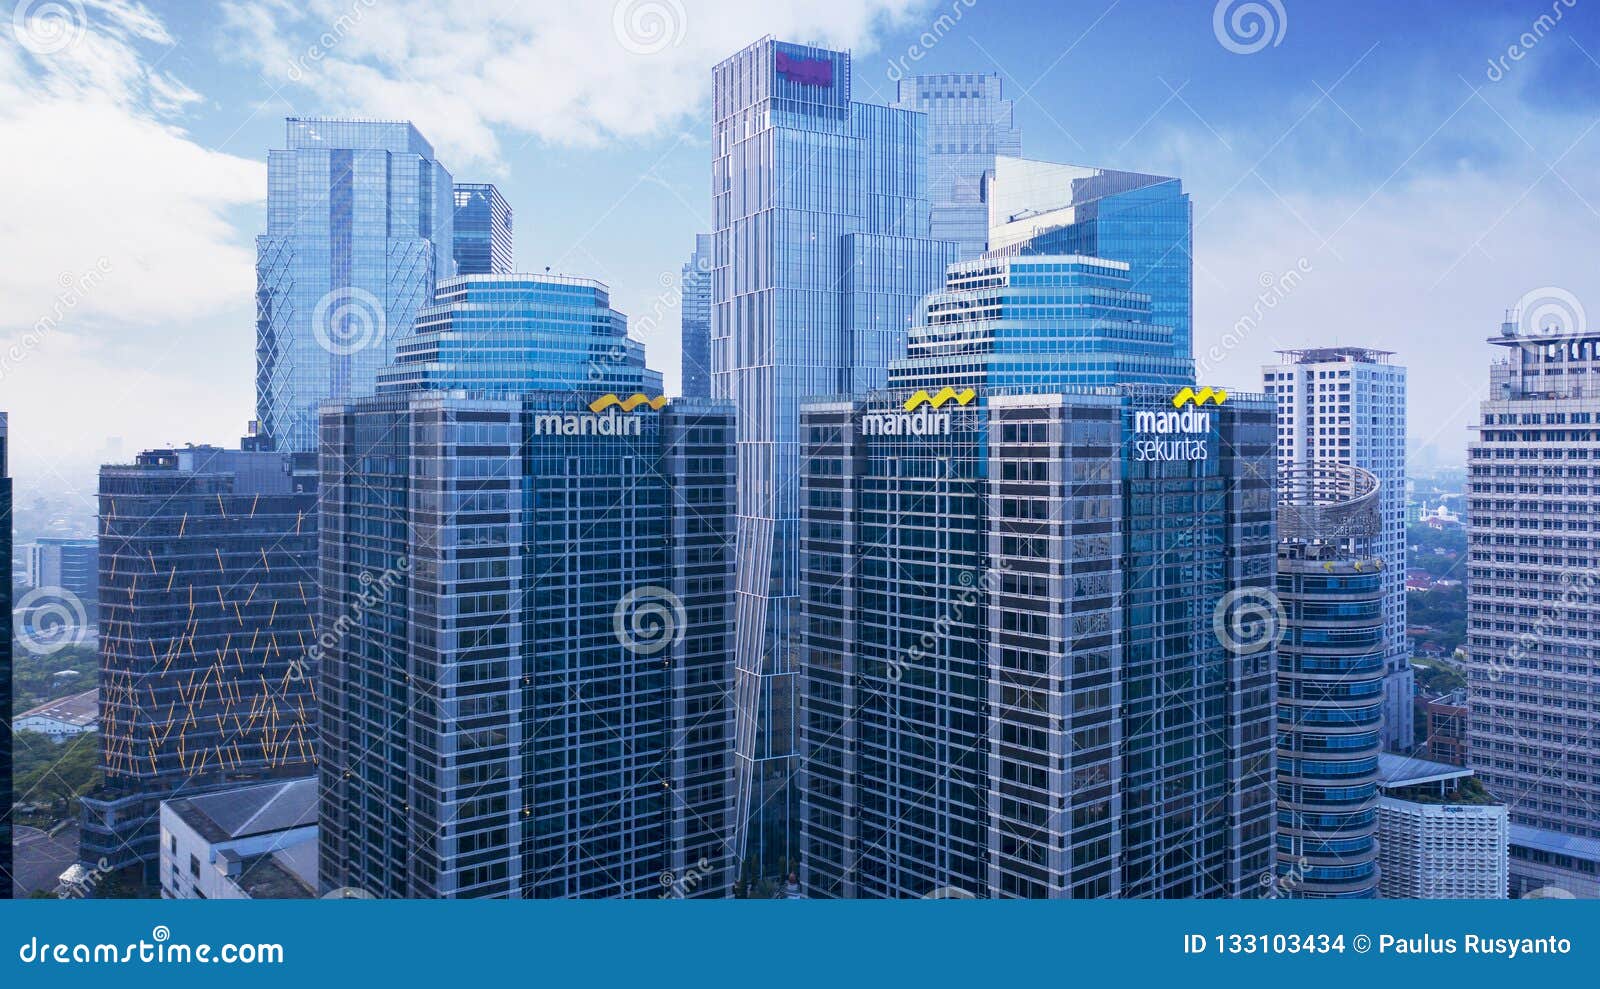 Two Mandiri Towers In South Jakarta  Editorial Stock Image 